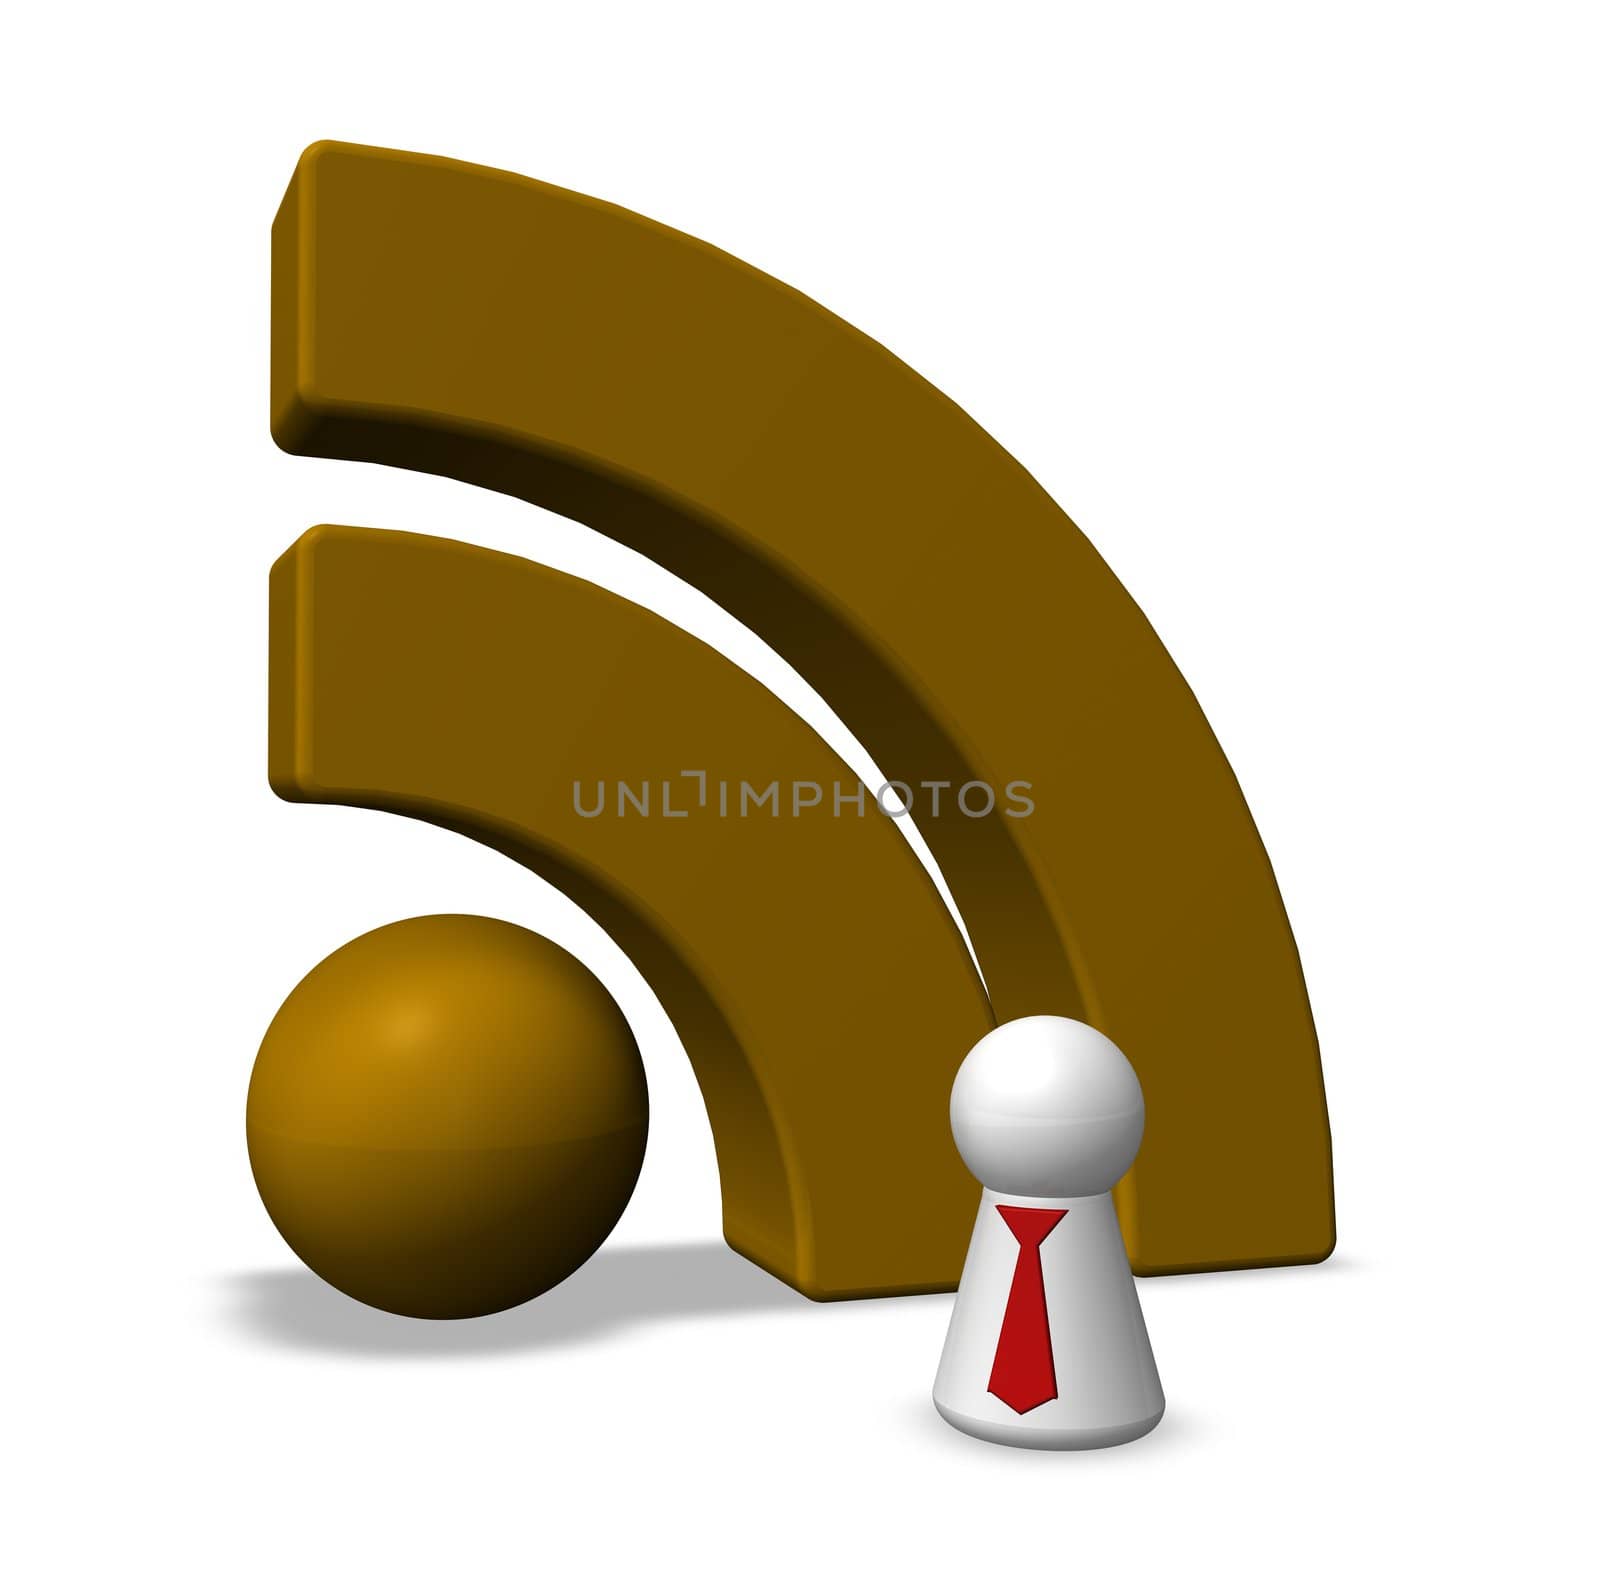 play figure with tie and rss symbol - 3d illustration